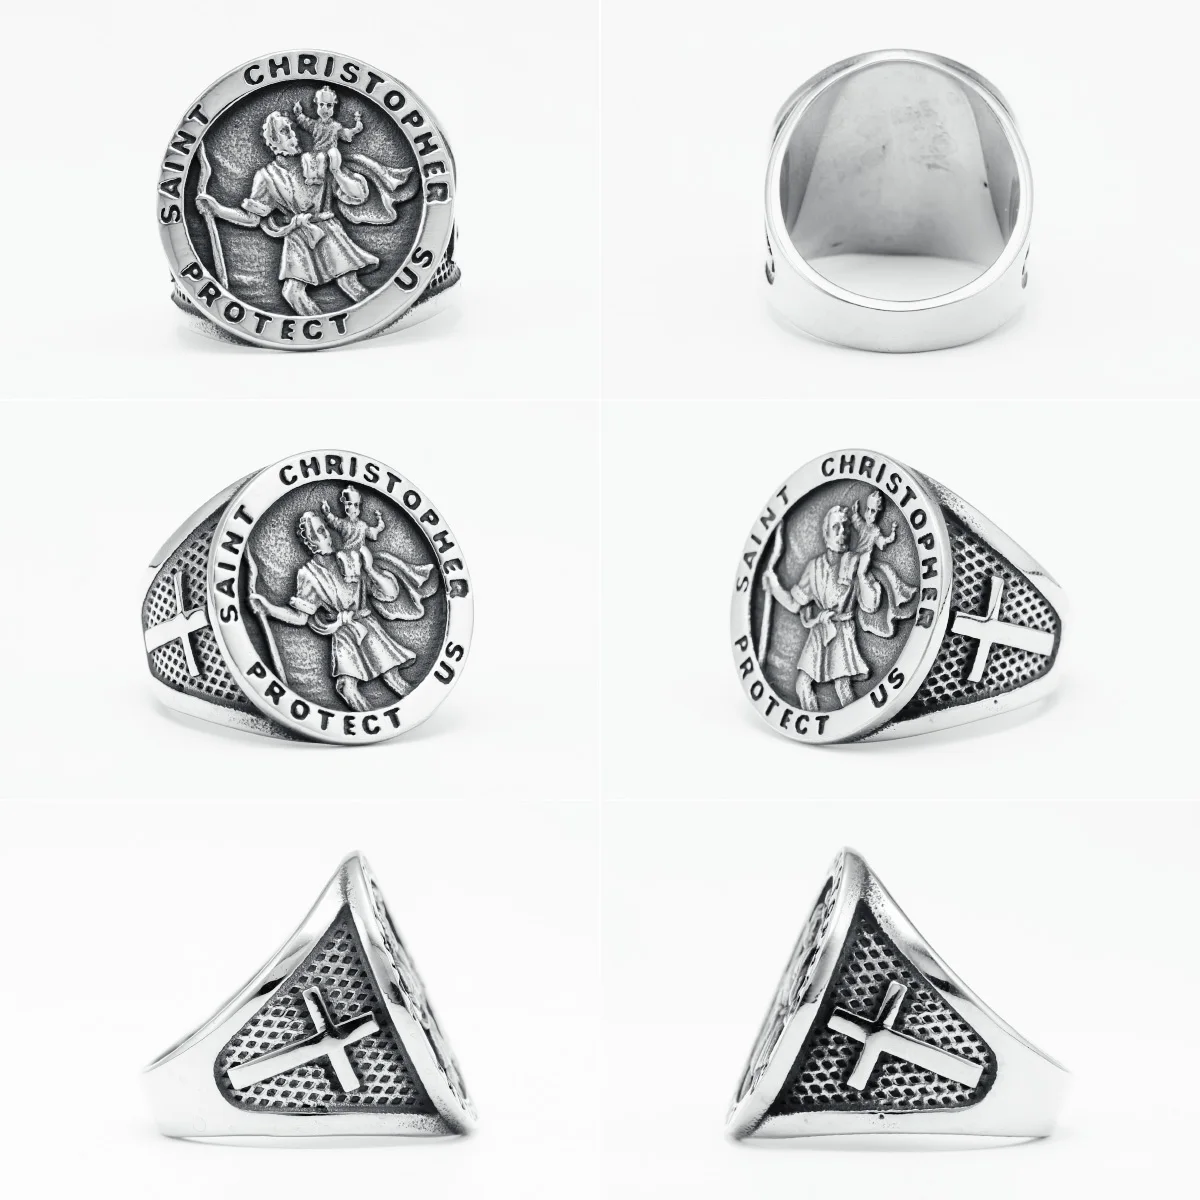 St Christopher Rings 316L Stainless Steel Men Patron Saint Cross Ring Traveler Amulet Punk Rock for Male Rider Jewelry Best Gift